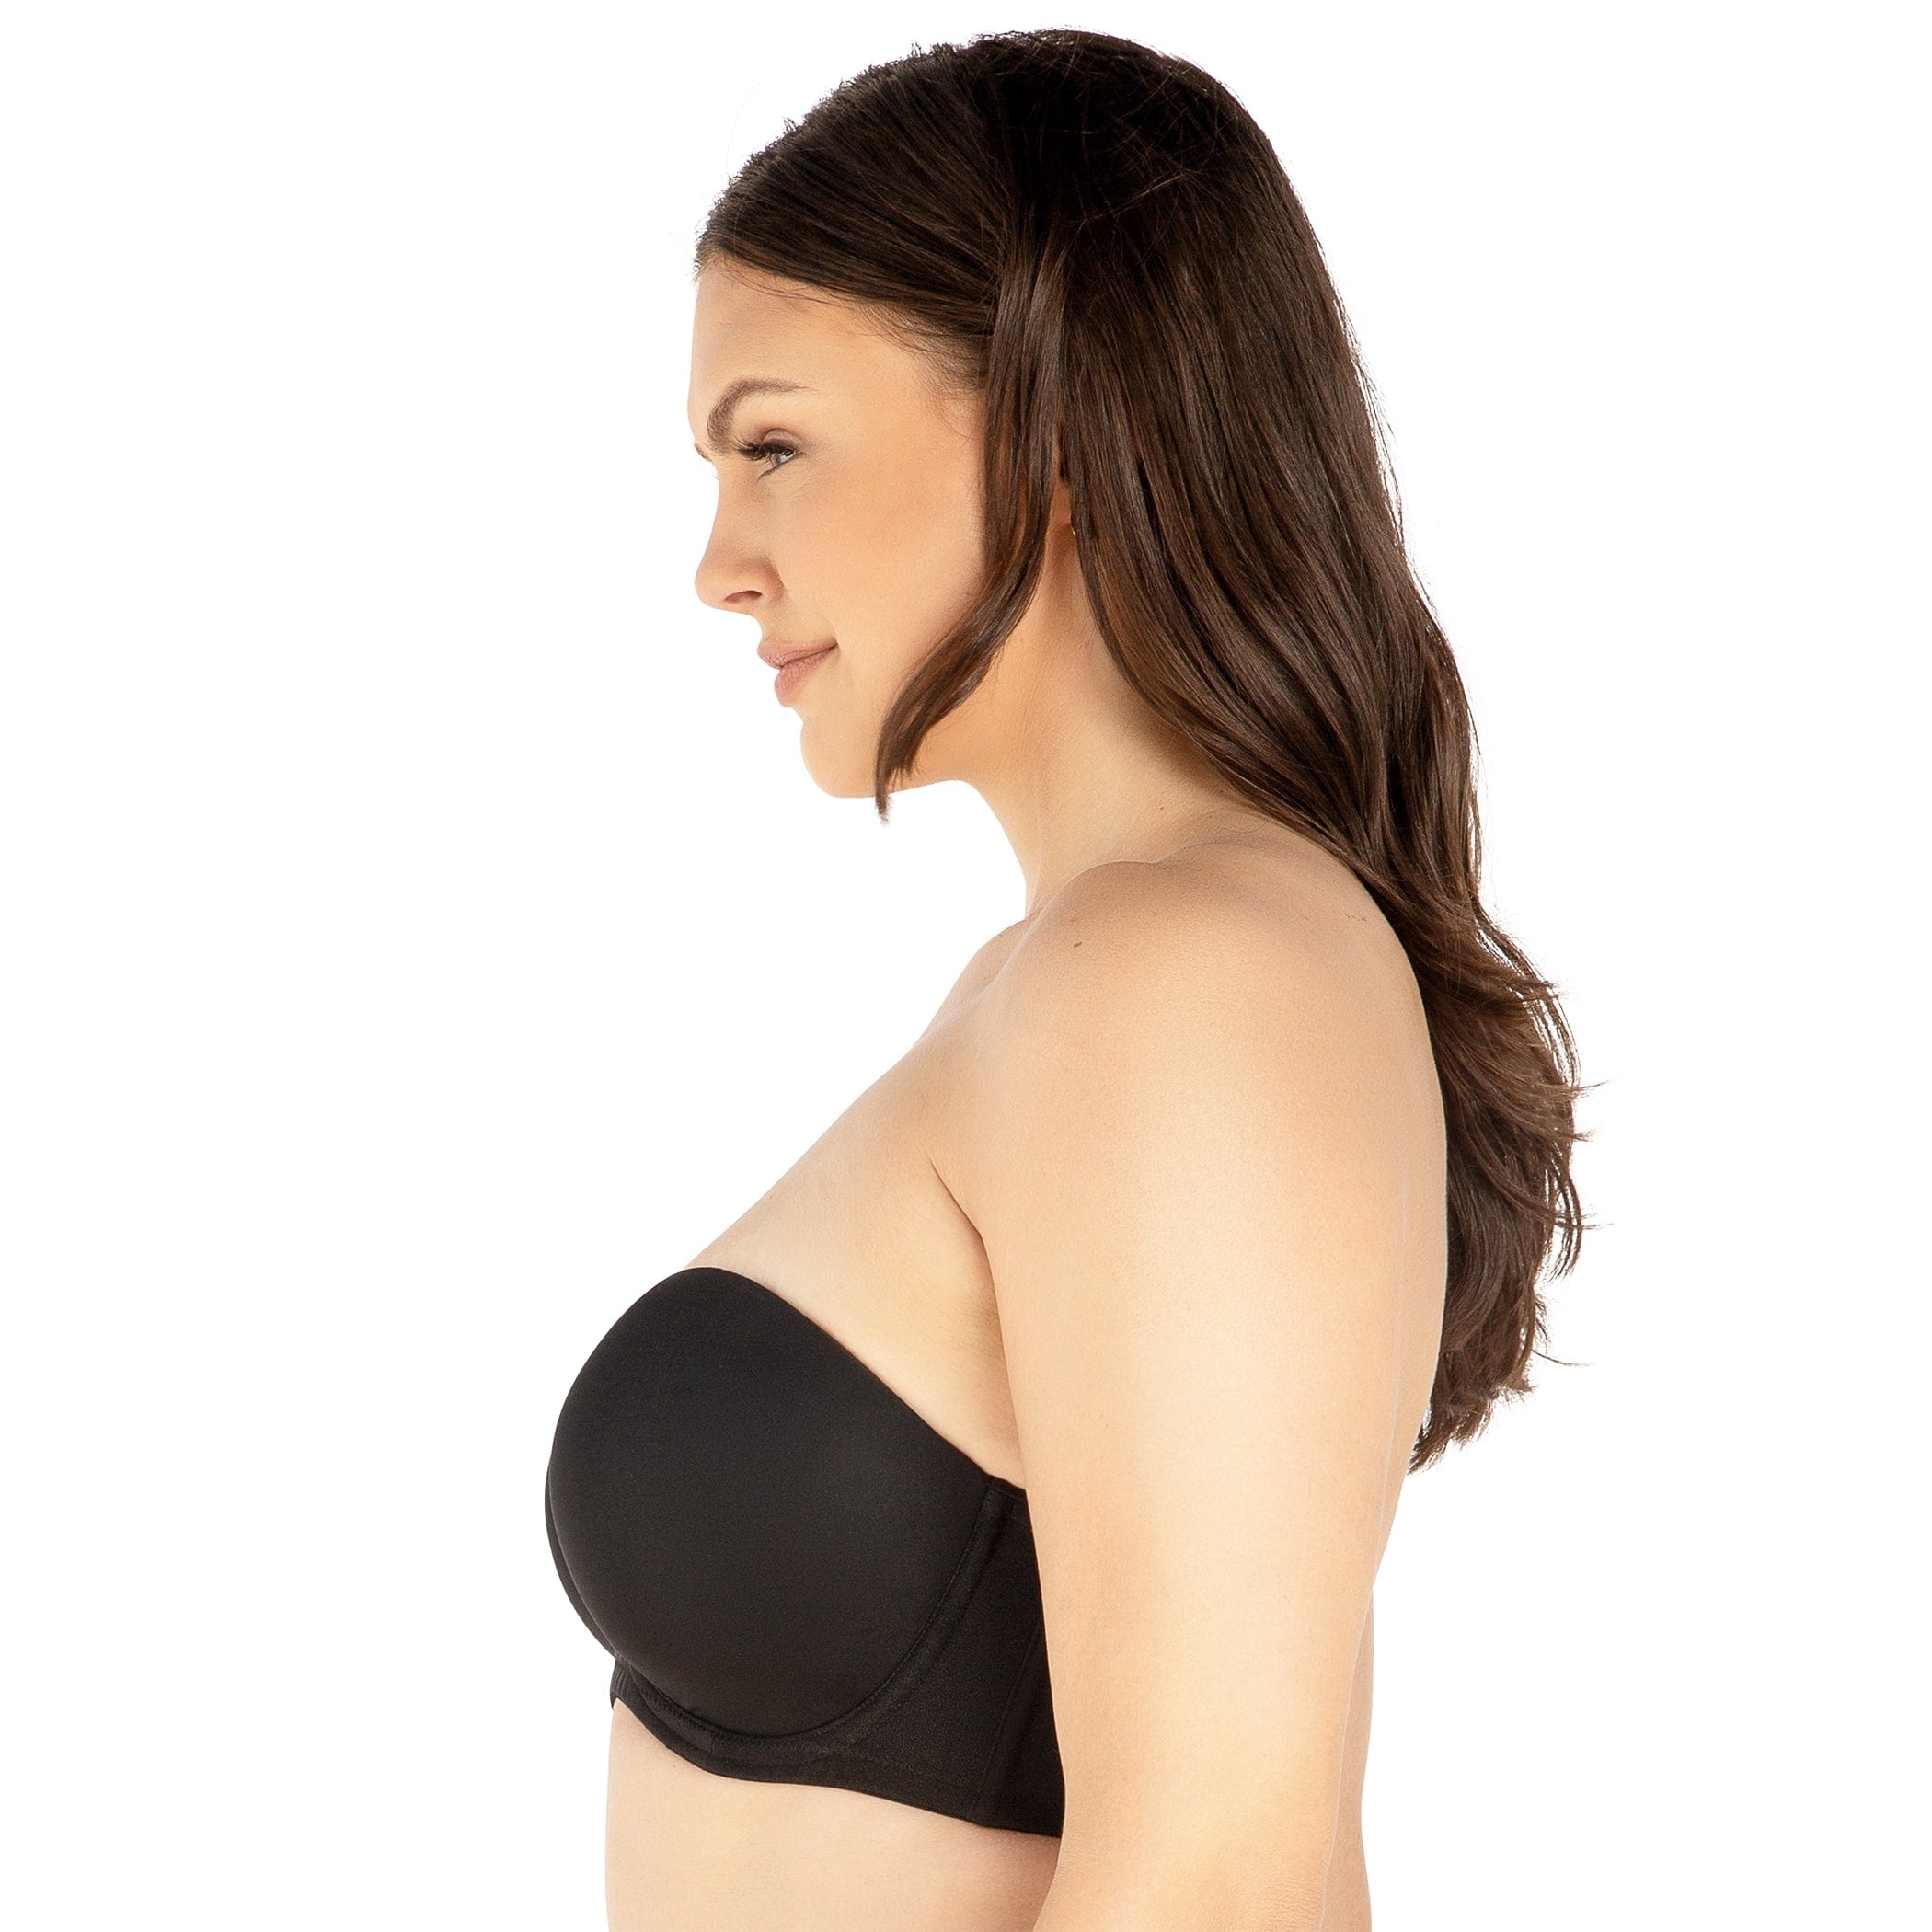 Parfait Lingerie Elissa Strapless Bra Review - She Might Be Loved